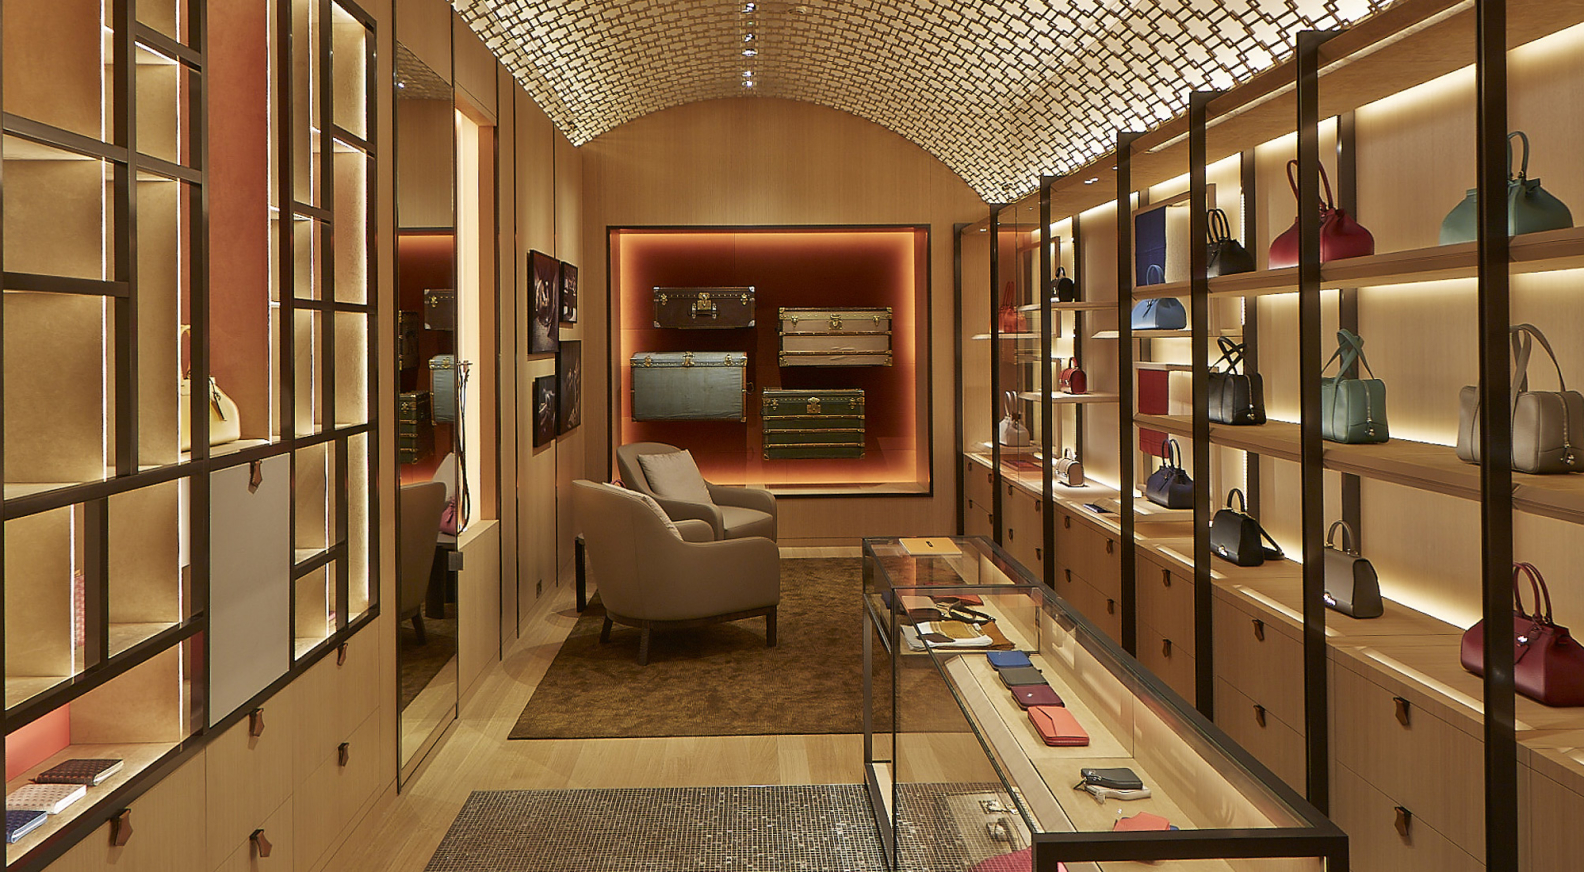 Givenchy just opened its first London flagship store